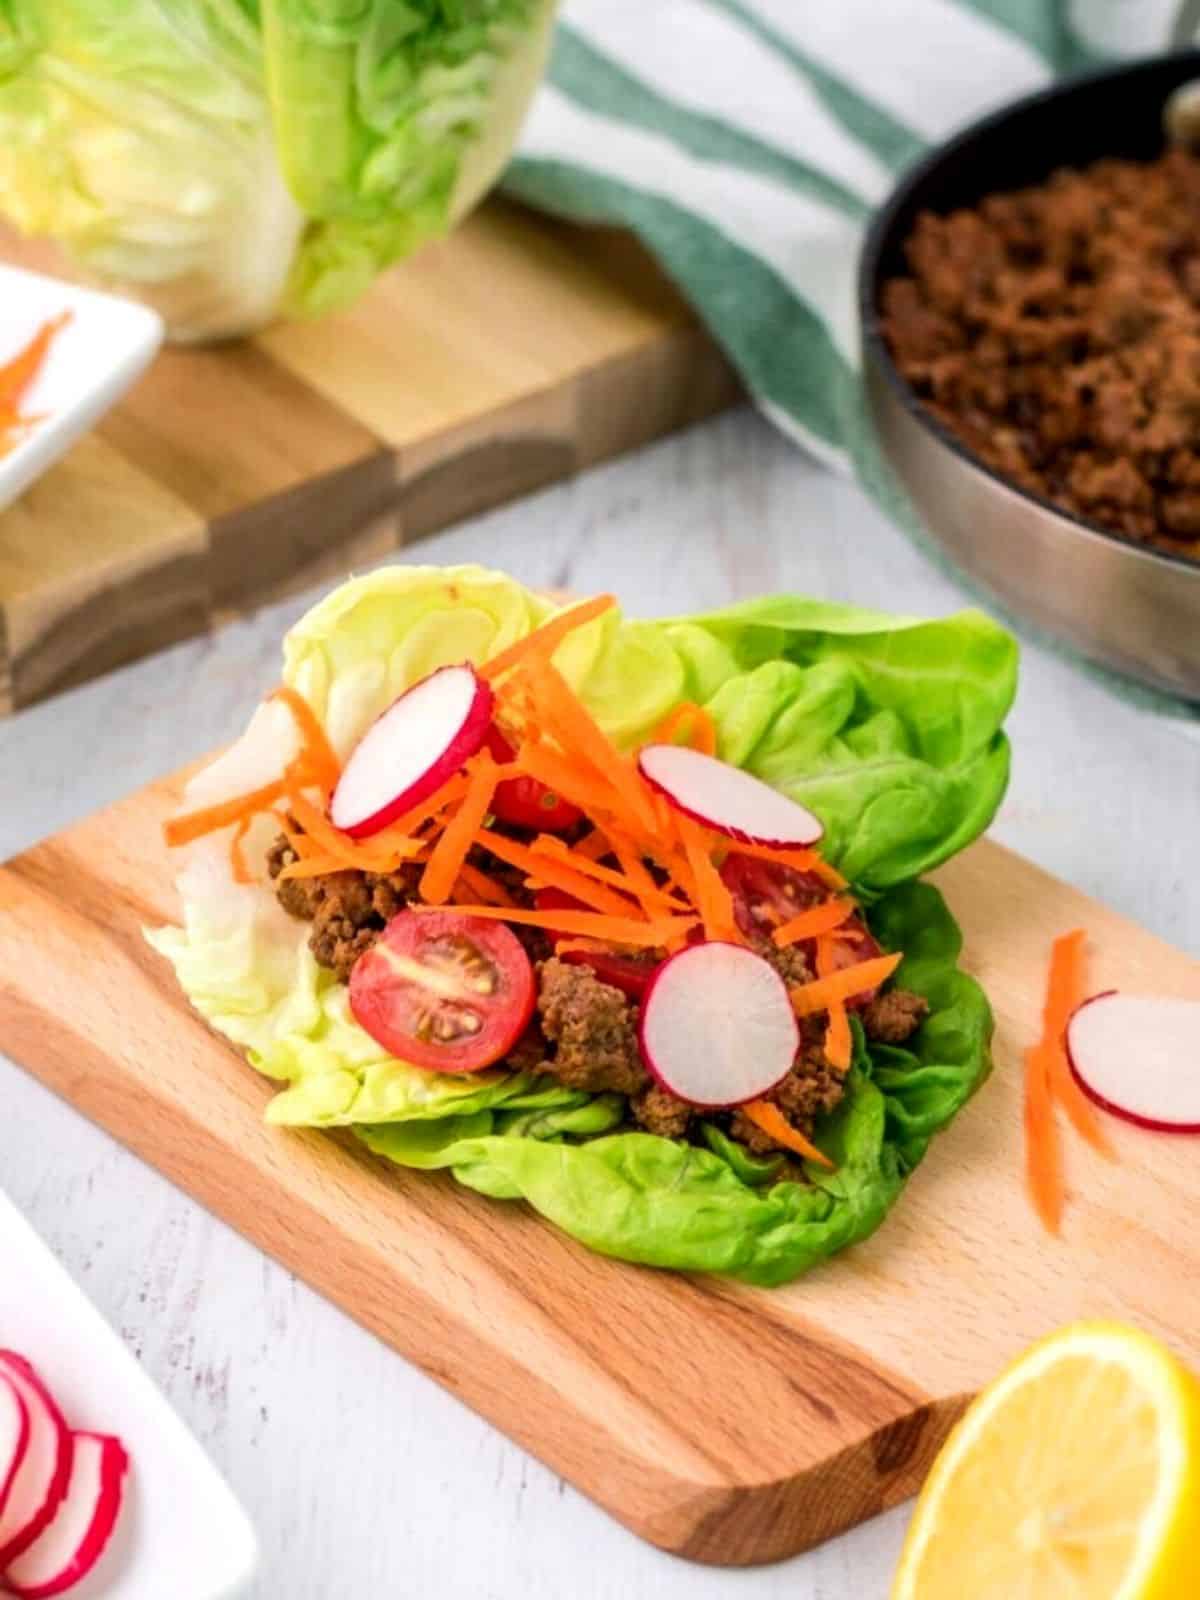 Ground beef in a lettuce wrap with carrots and raddishes.